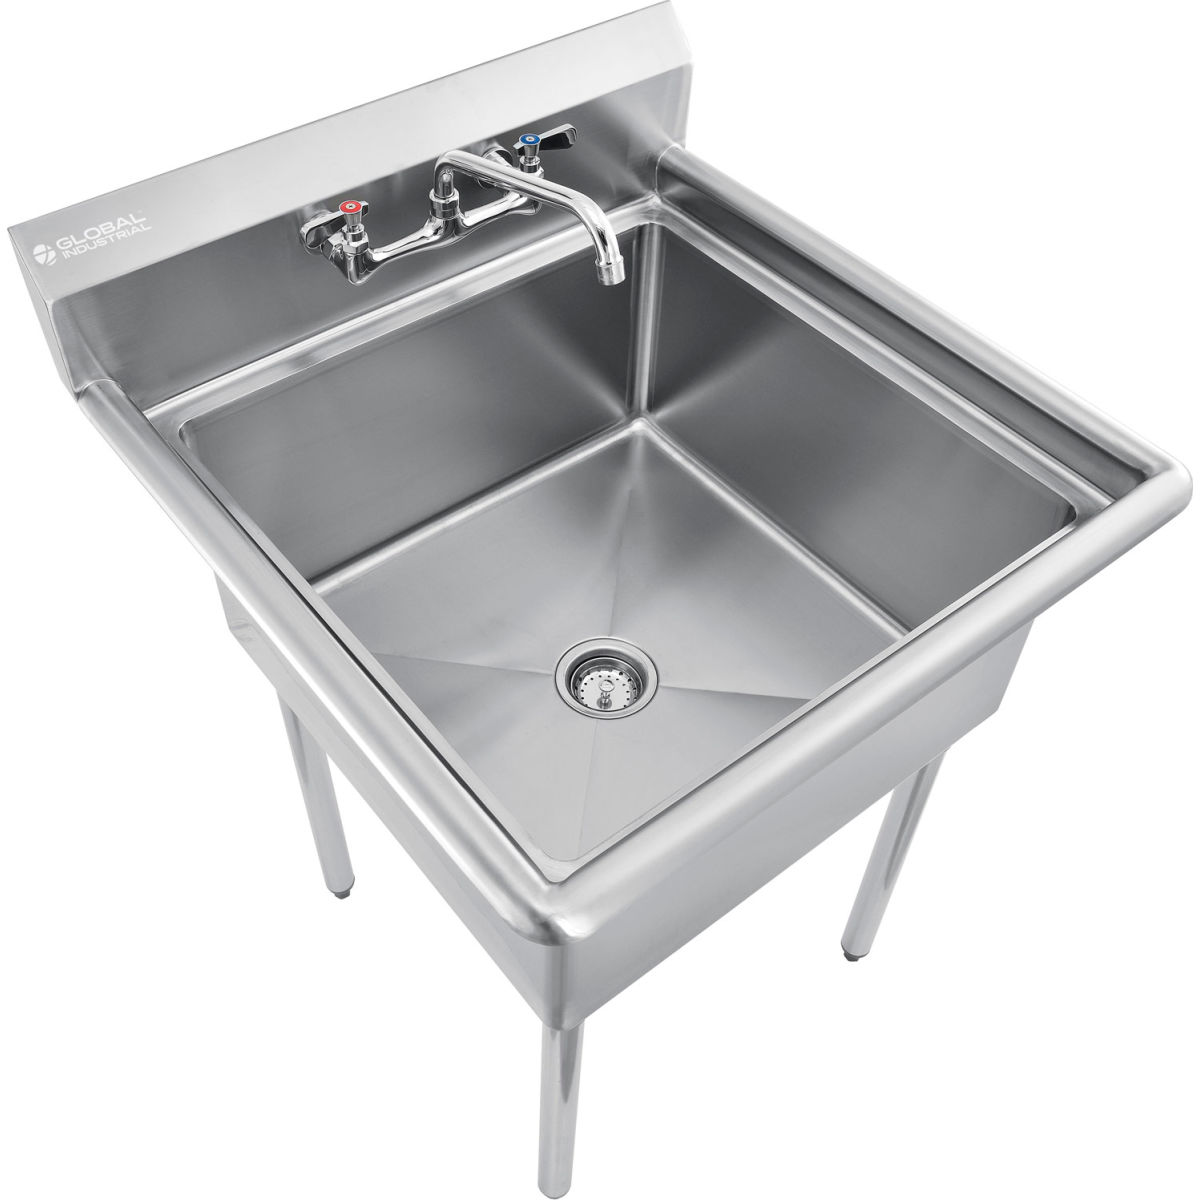 670452 Global Industrial Stainless Steel Utility Sink with Faucet & 10 in. Backsplash - 24 x 24 x 12 in -  Ningbo Yinzhou Haisland Machinery